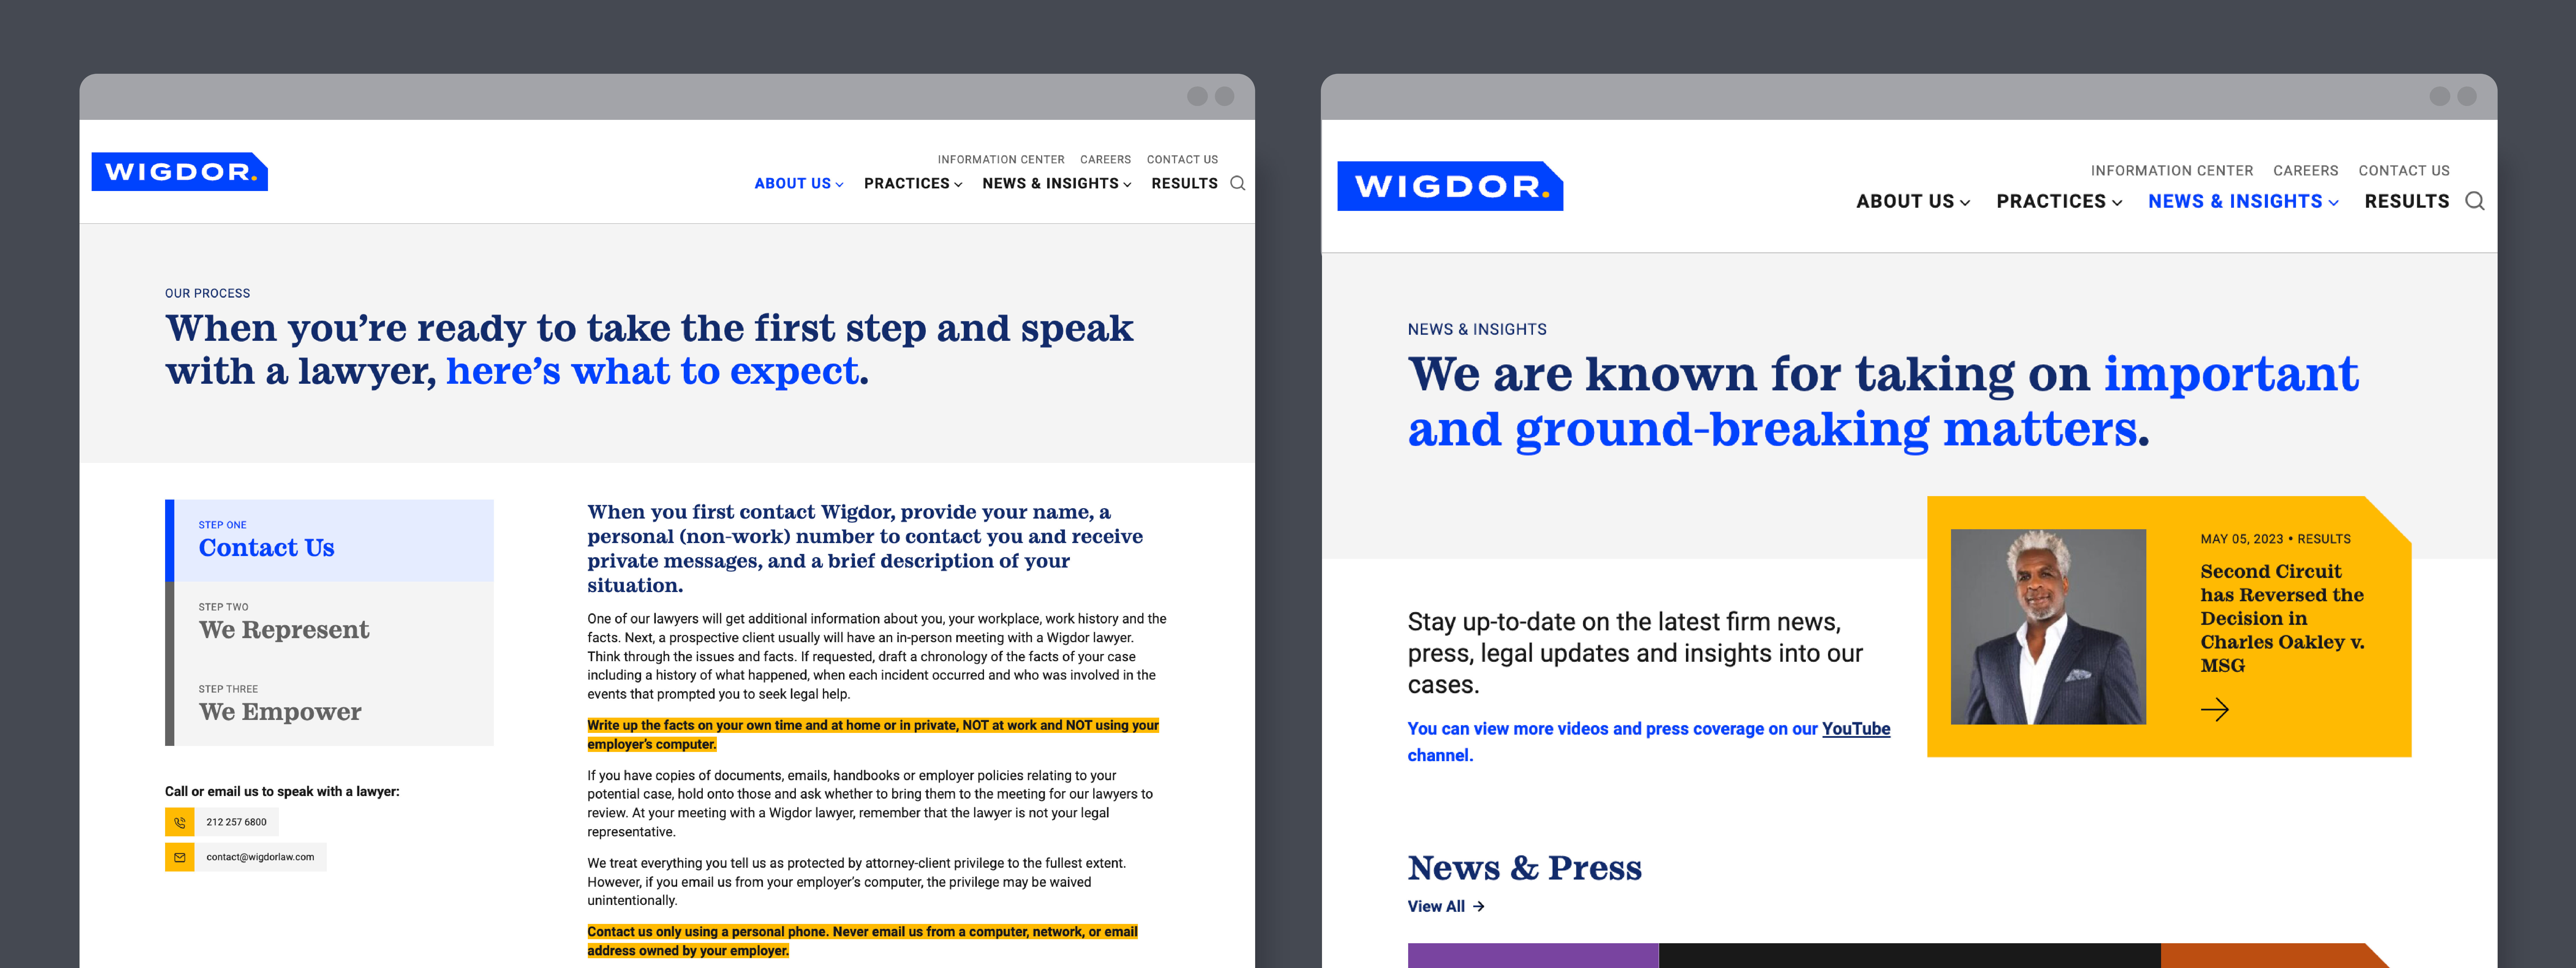 Wigdor website screenshots News and Insights pages